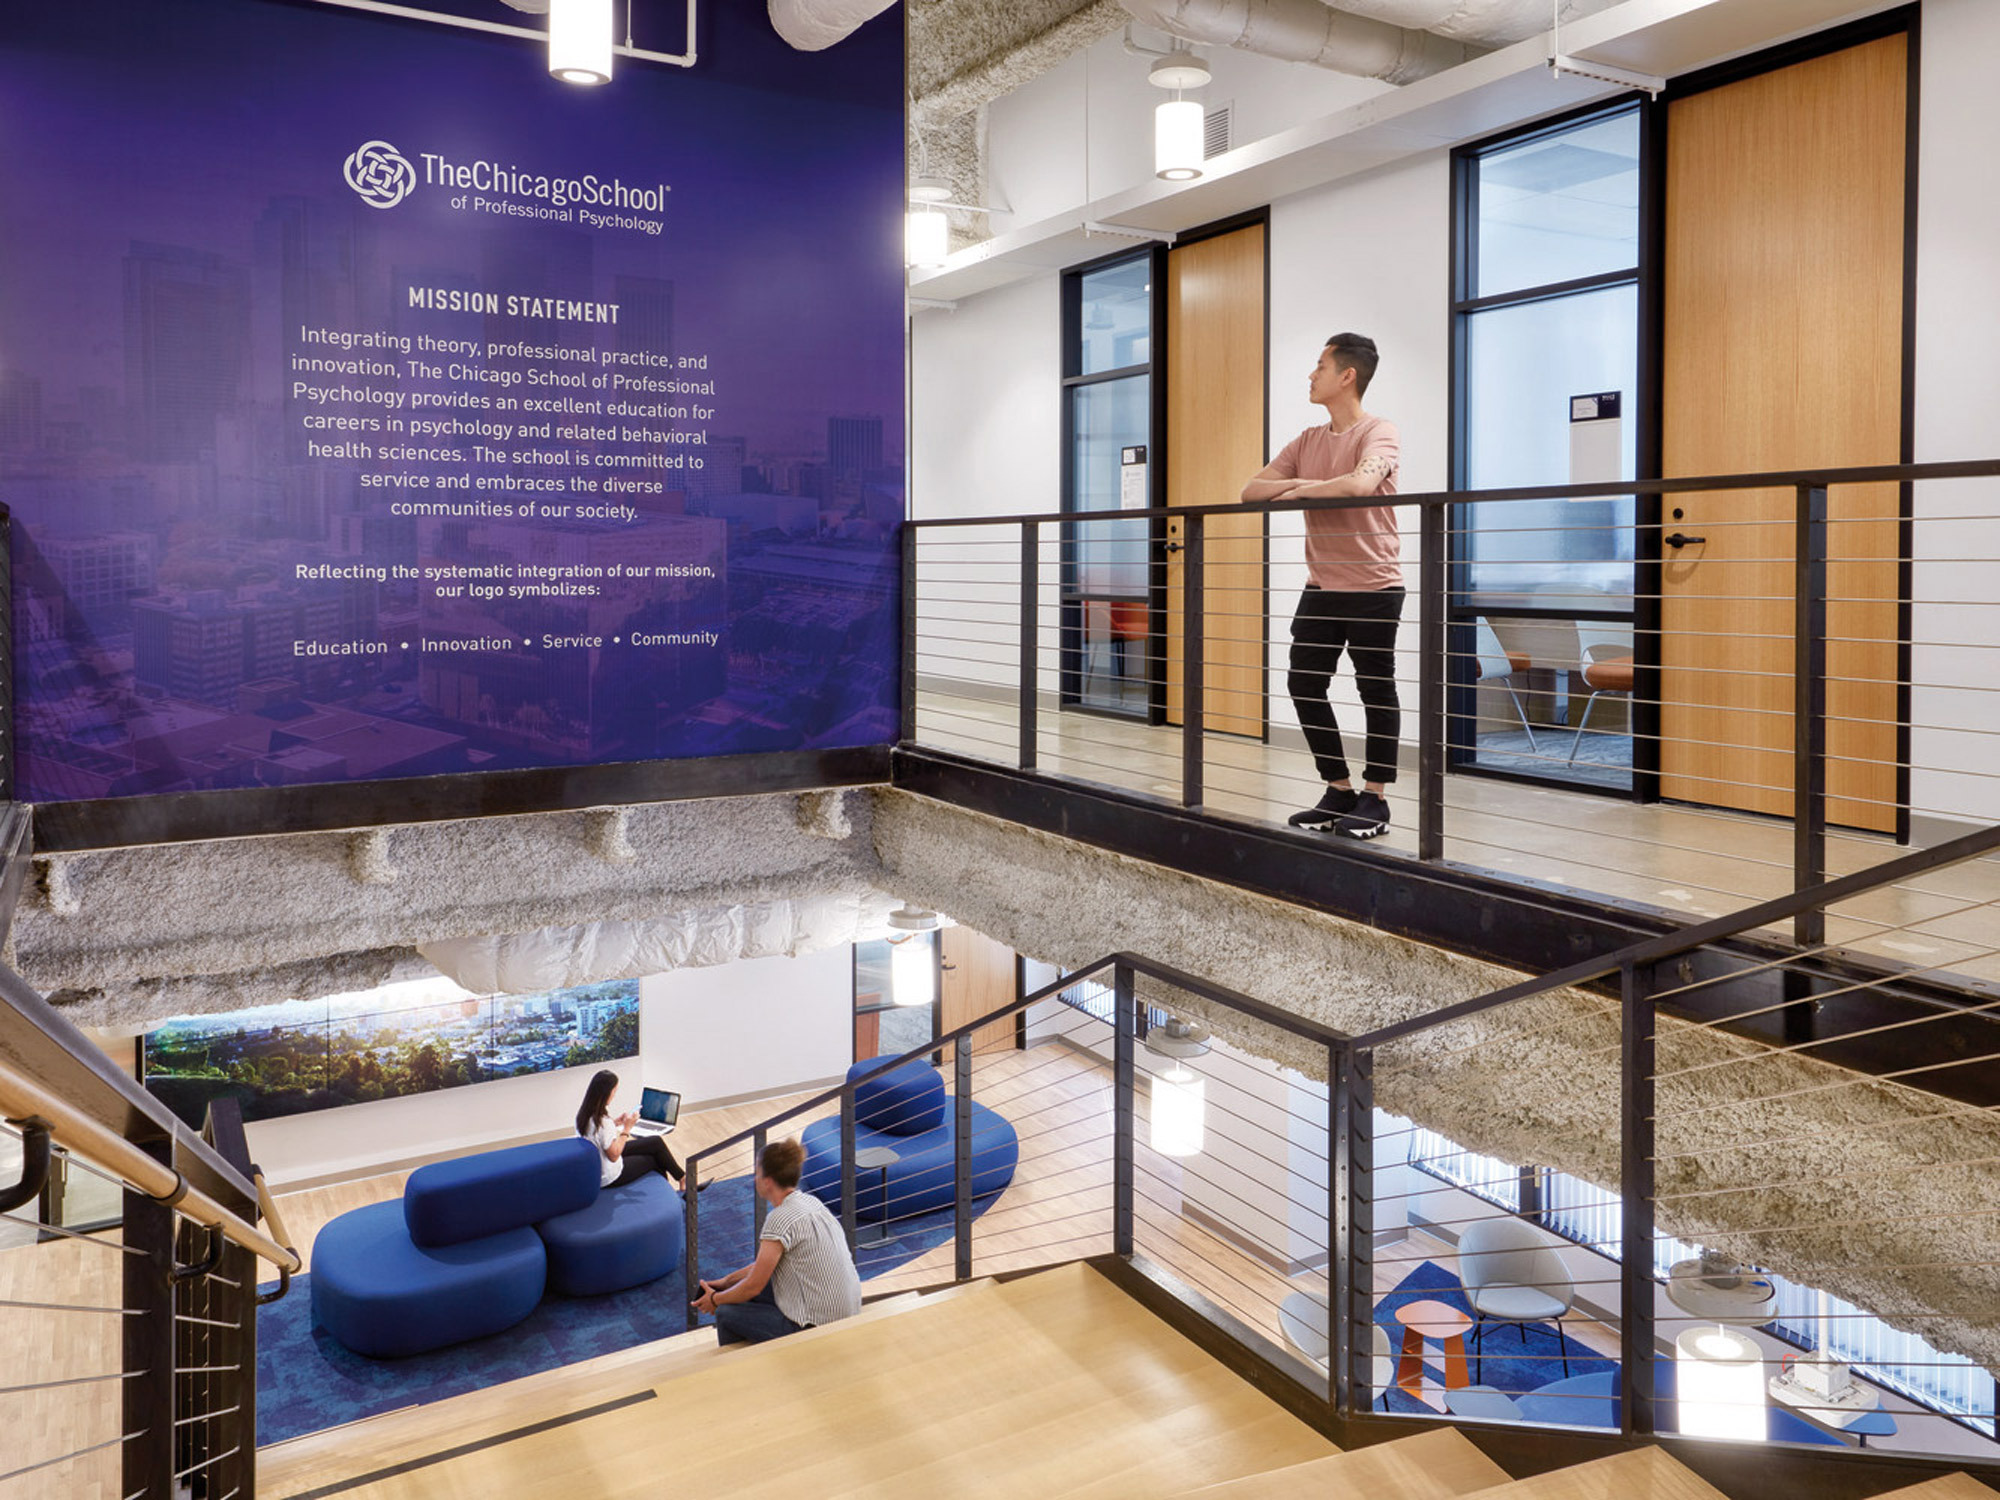 Open-plan office space with a multi-level layout featuring natural wood finishes and glass partitions. Blue curved sofas complement the informal seating area, with a woman standing at the balcony overlooking the workspace. The Chicago School mission statement adorns the wall, enhancing the educational environment.